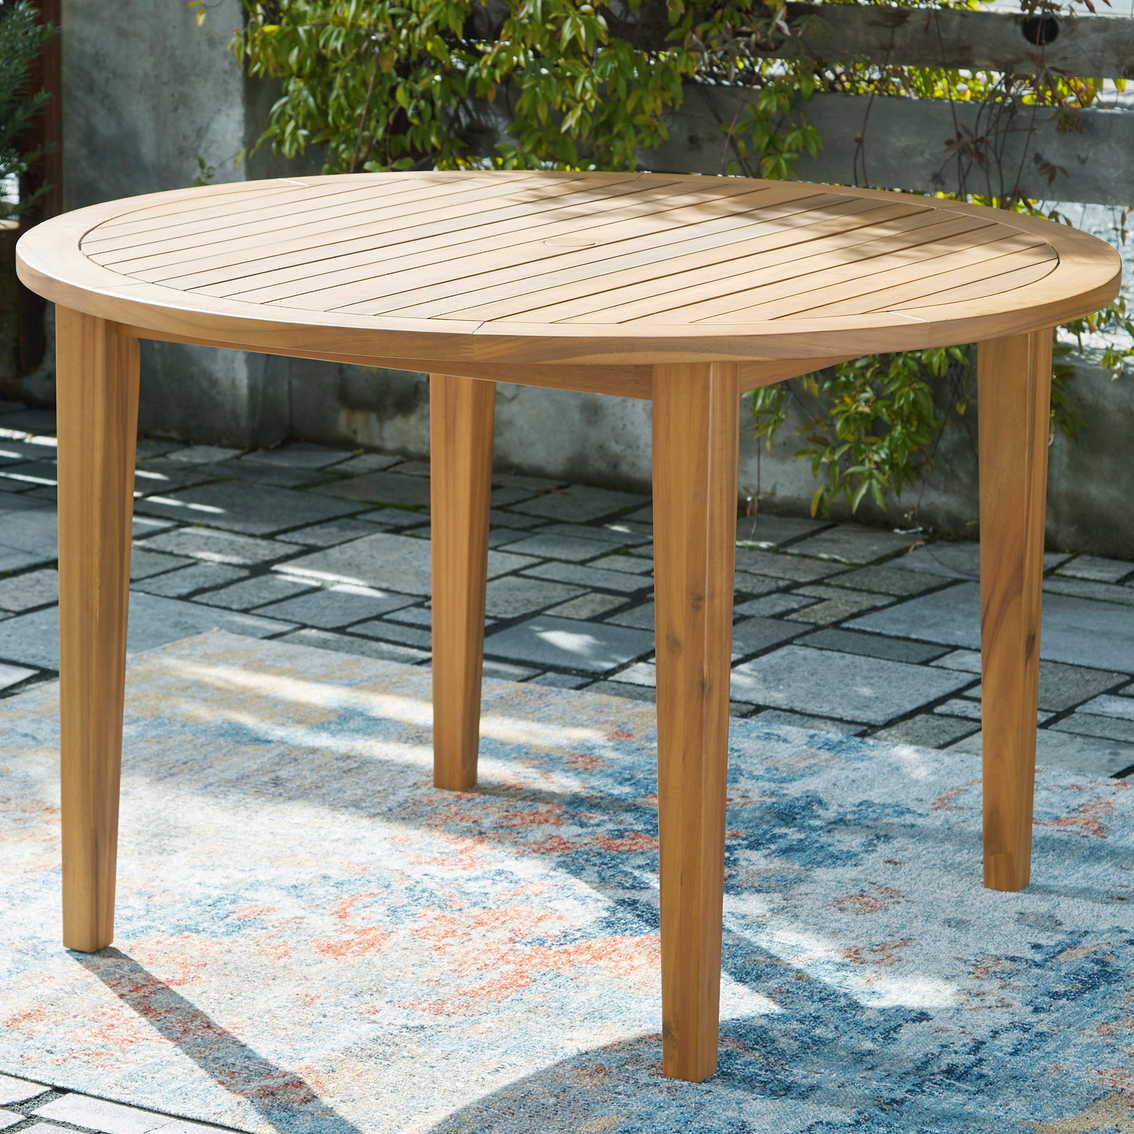 Signature Design by Ashley Janiyah Outdoor Round Dining Table - Image 4 of 6